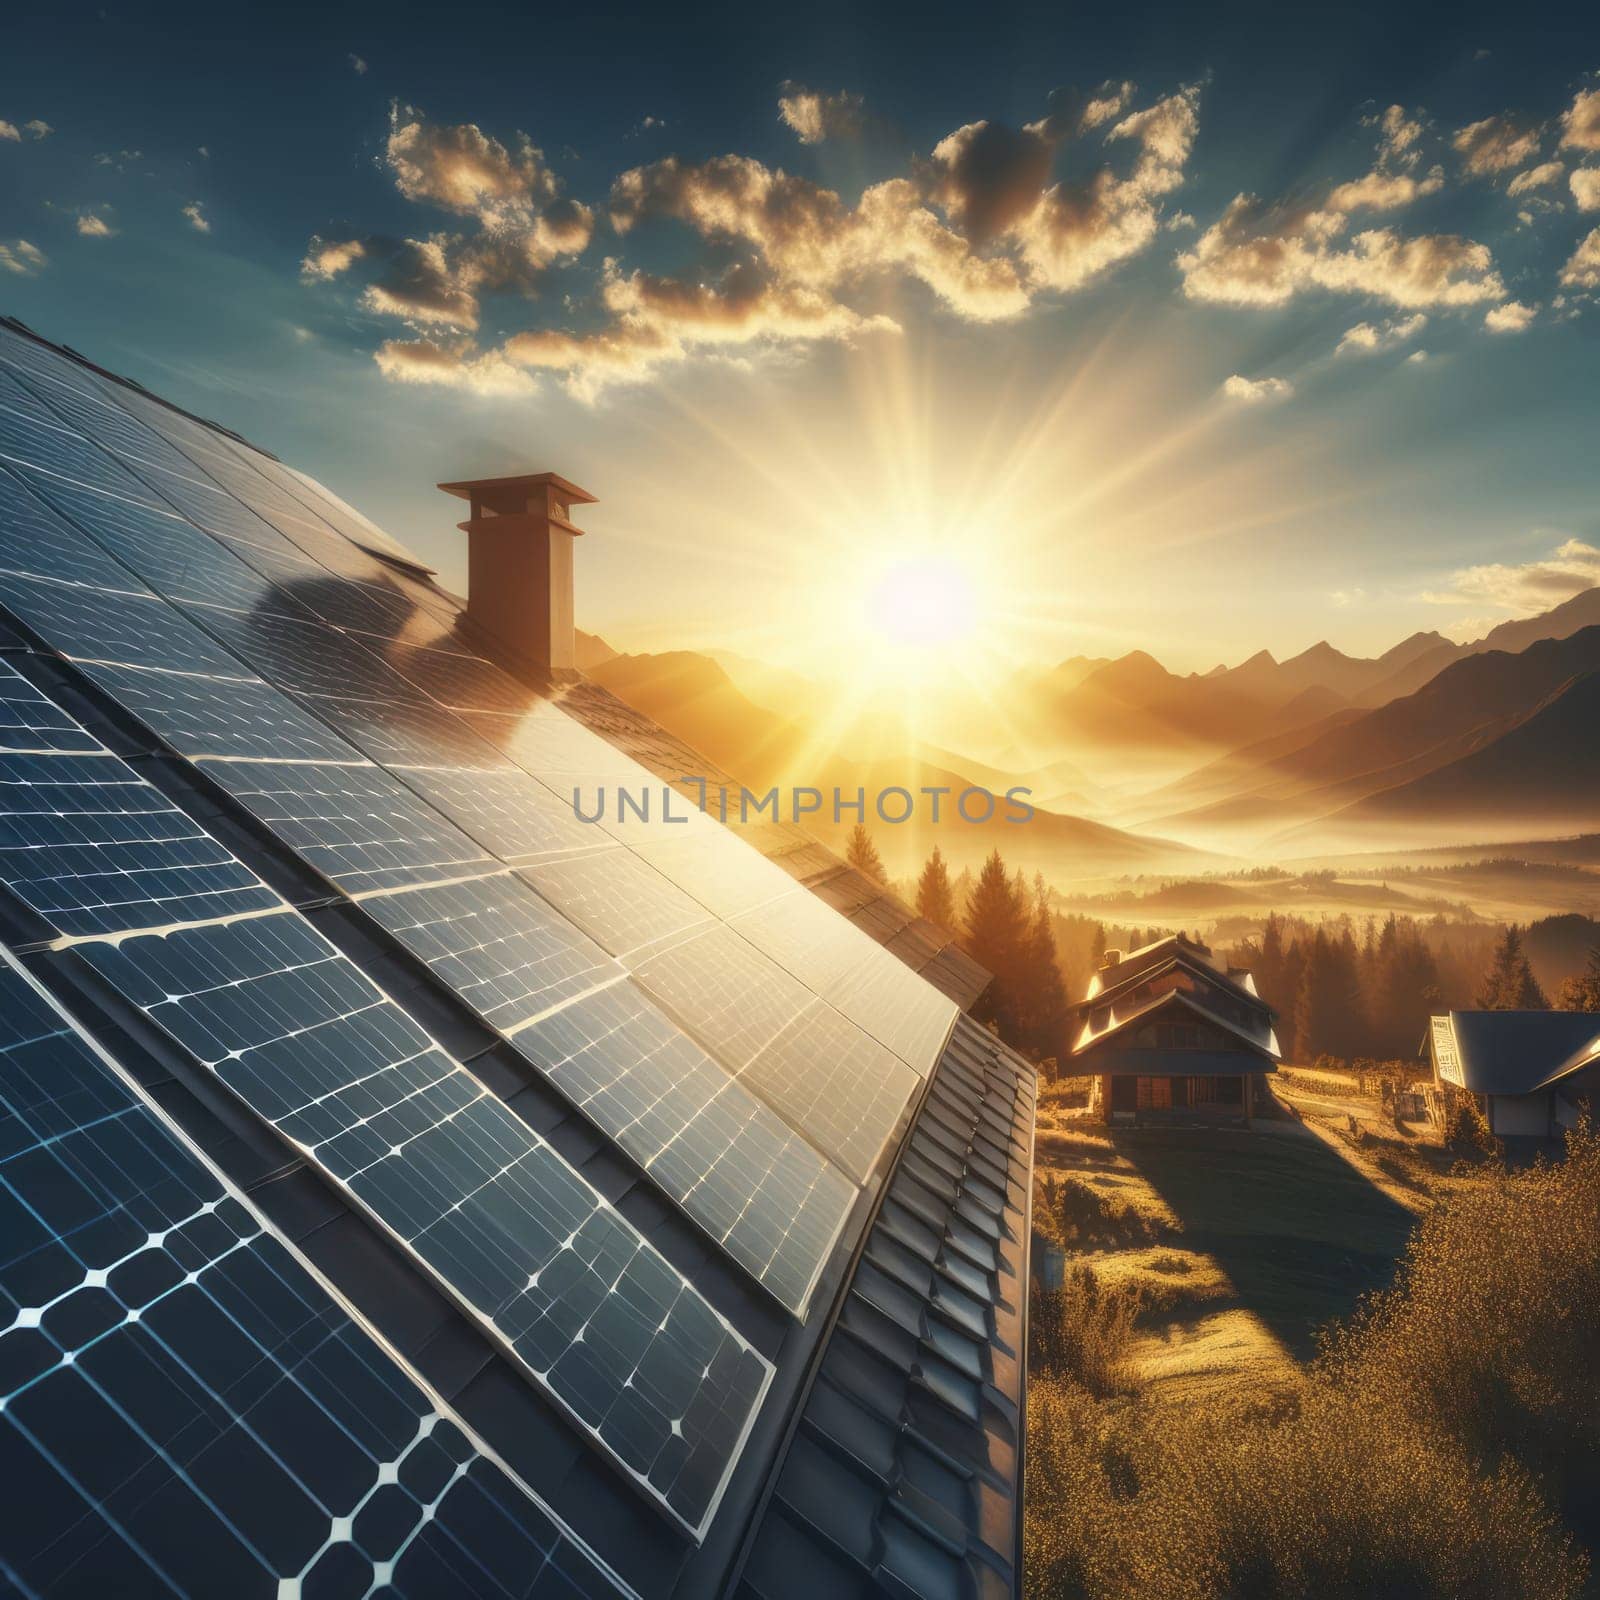 Solar panel on a roof with a beautiful sunrise and mountains in the background